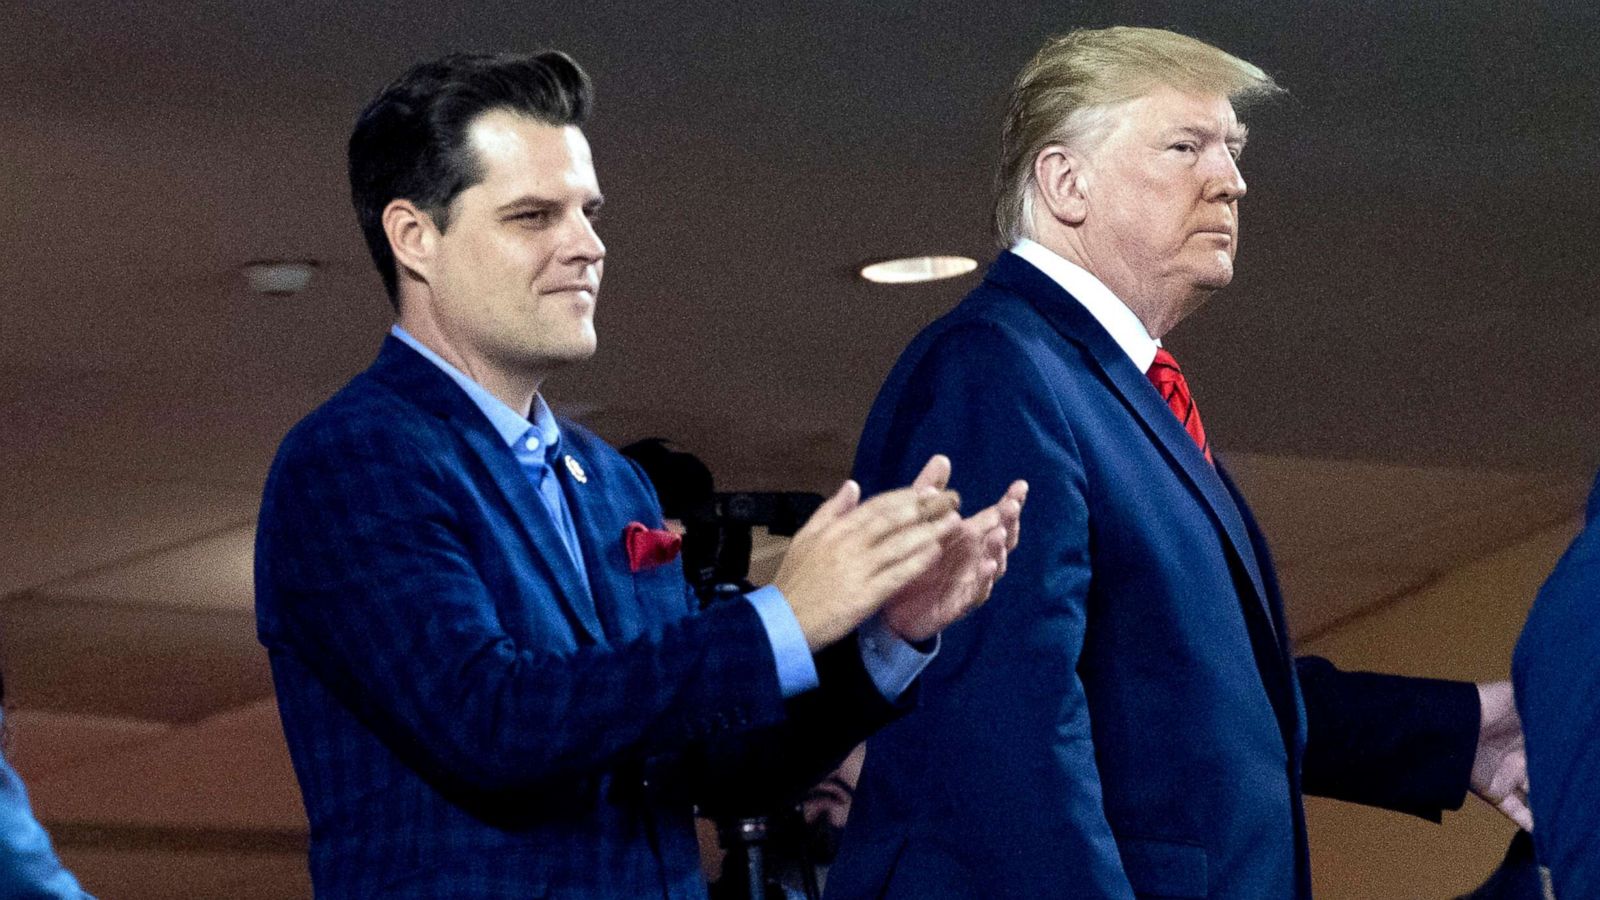 Www Brezar Silpack Blud First Time Sex - Gaetz, under investigation for sex allegations, sought blanket pardon from  Trump: Sources - ABC News